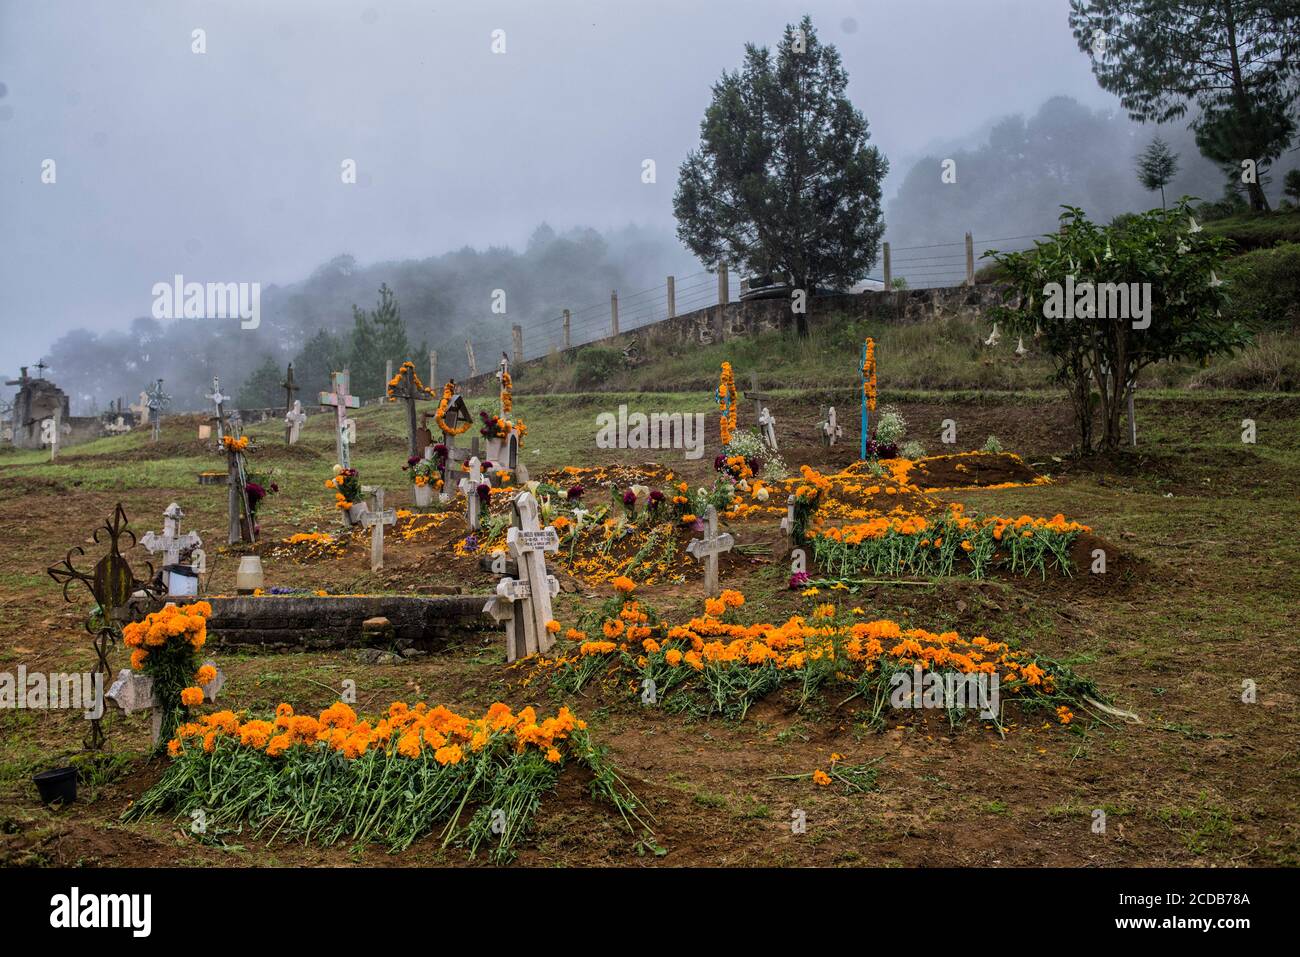 Tombs decorated with marigold flowers and other offerings at the cemetery during the Day of the Dead celebration. Stock Photo